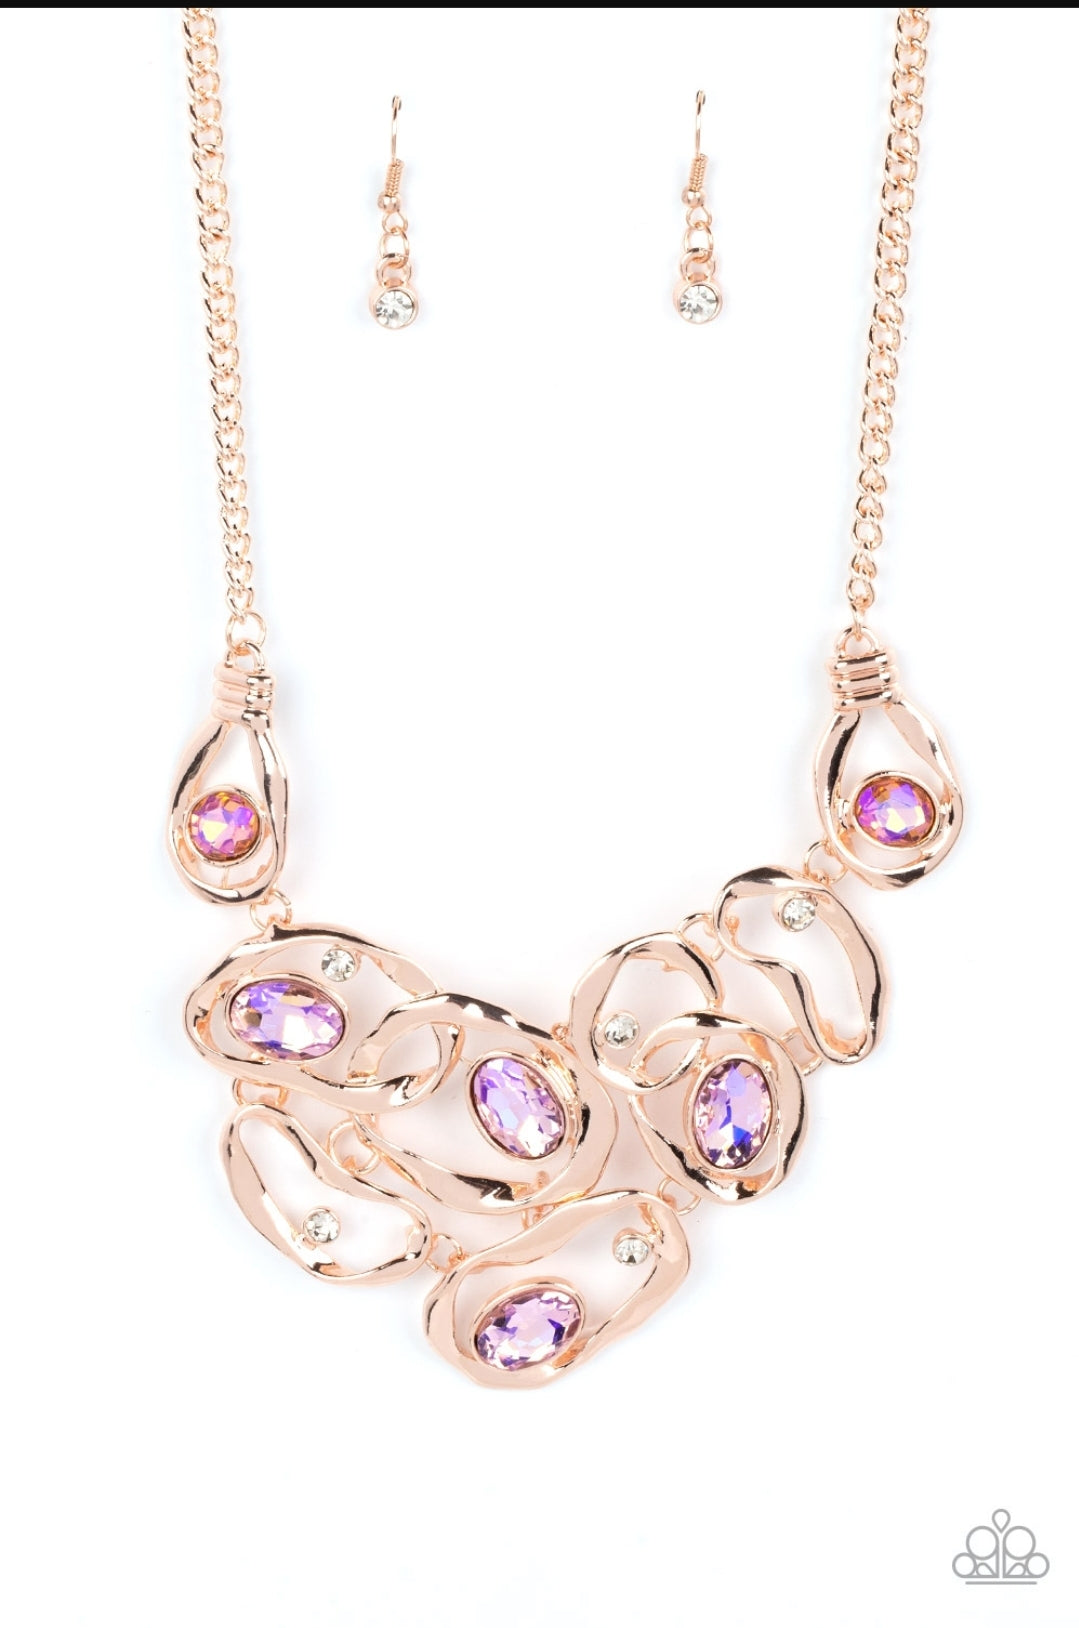 Warp Speed Rose Gold July 2022 Life of the Party Multi Necklace Set - Princess Glam Shop